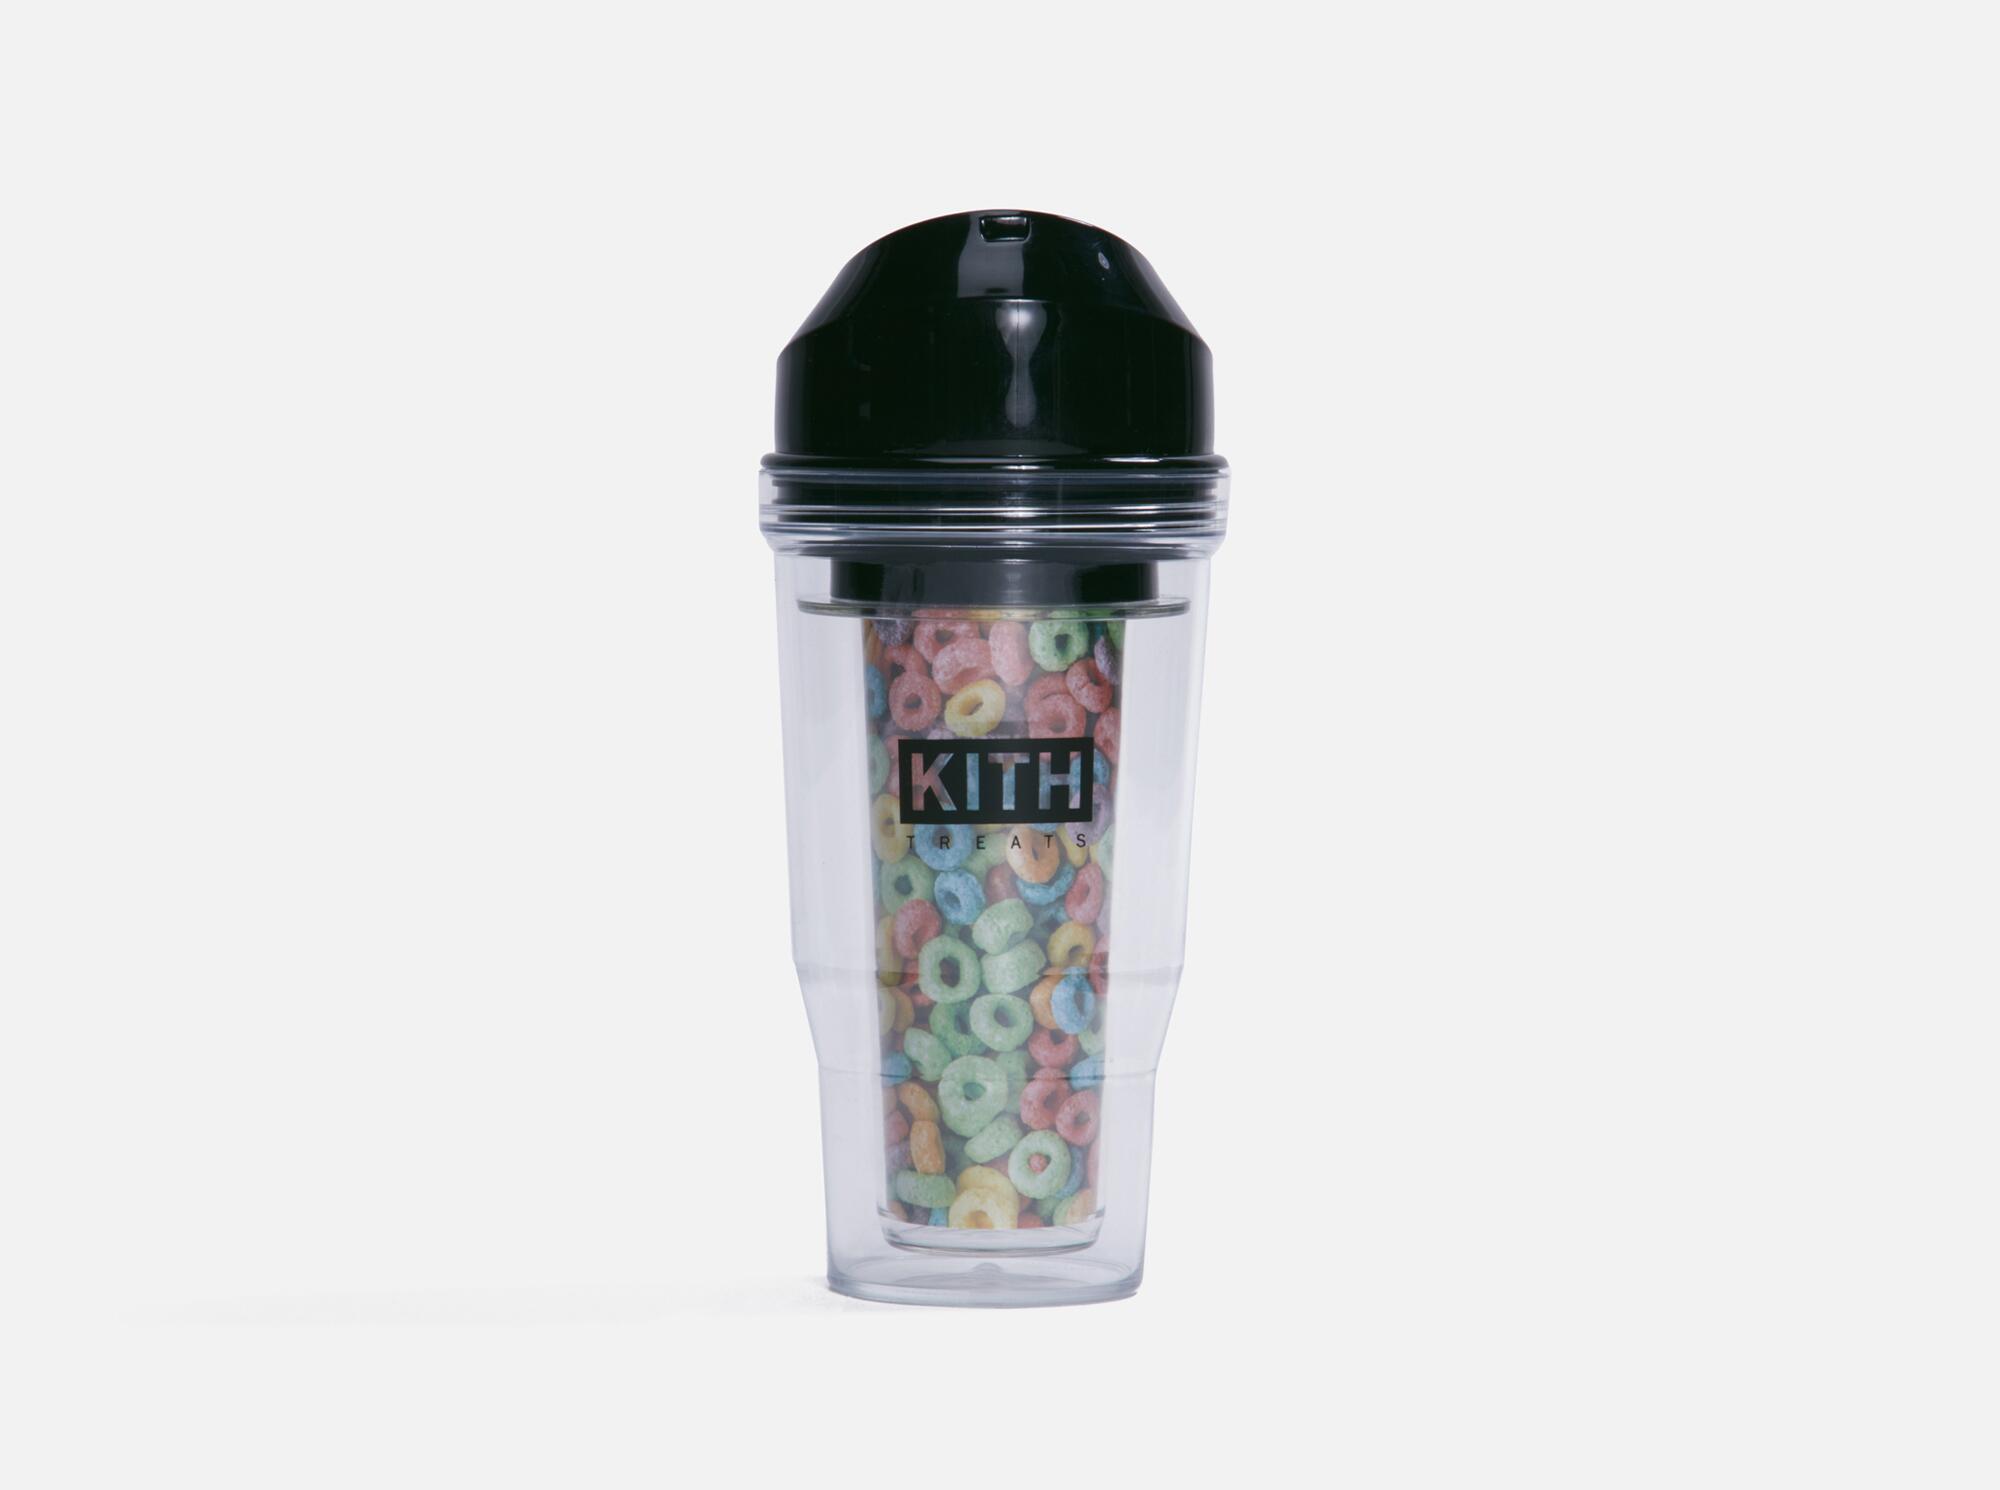 Plastic commuter cup for cereal